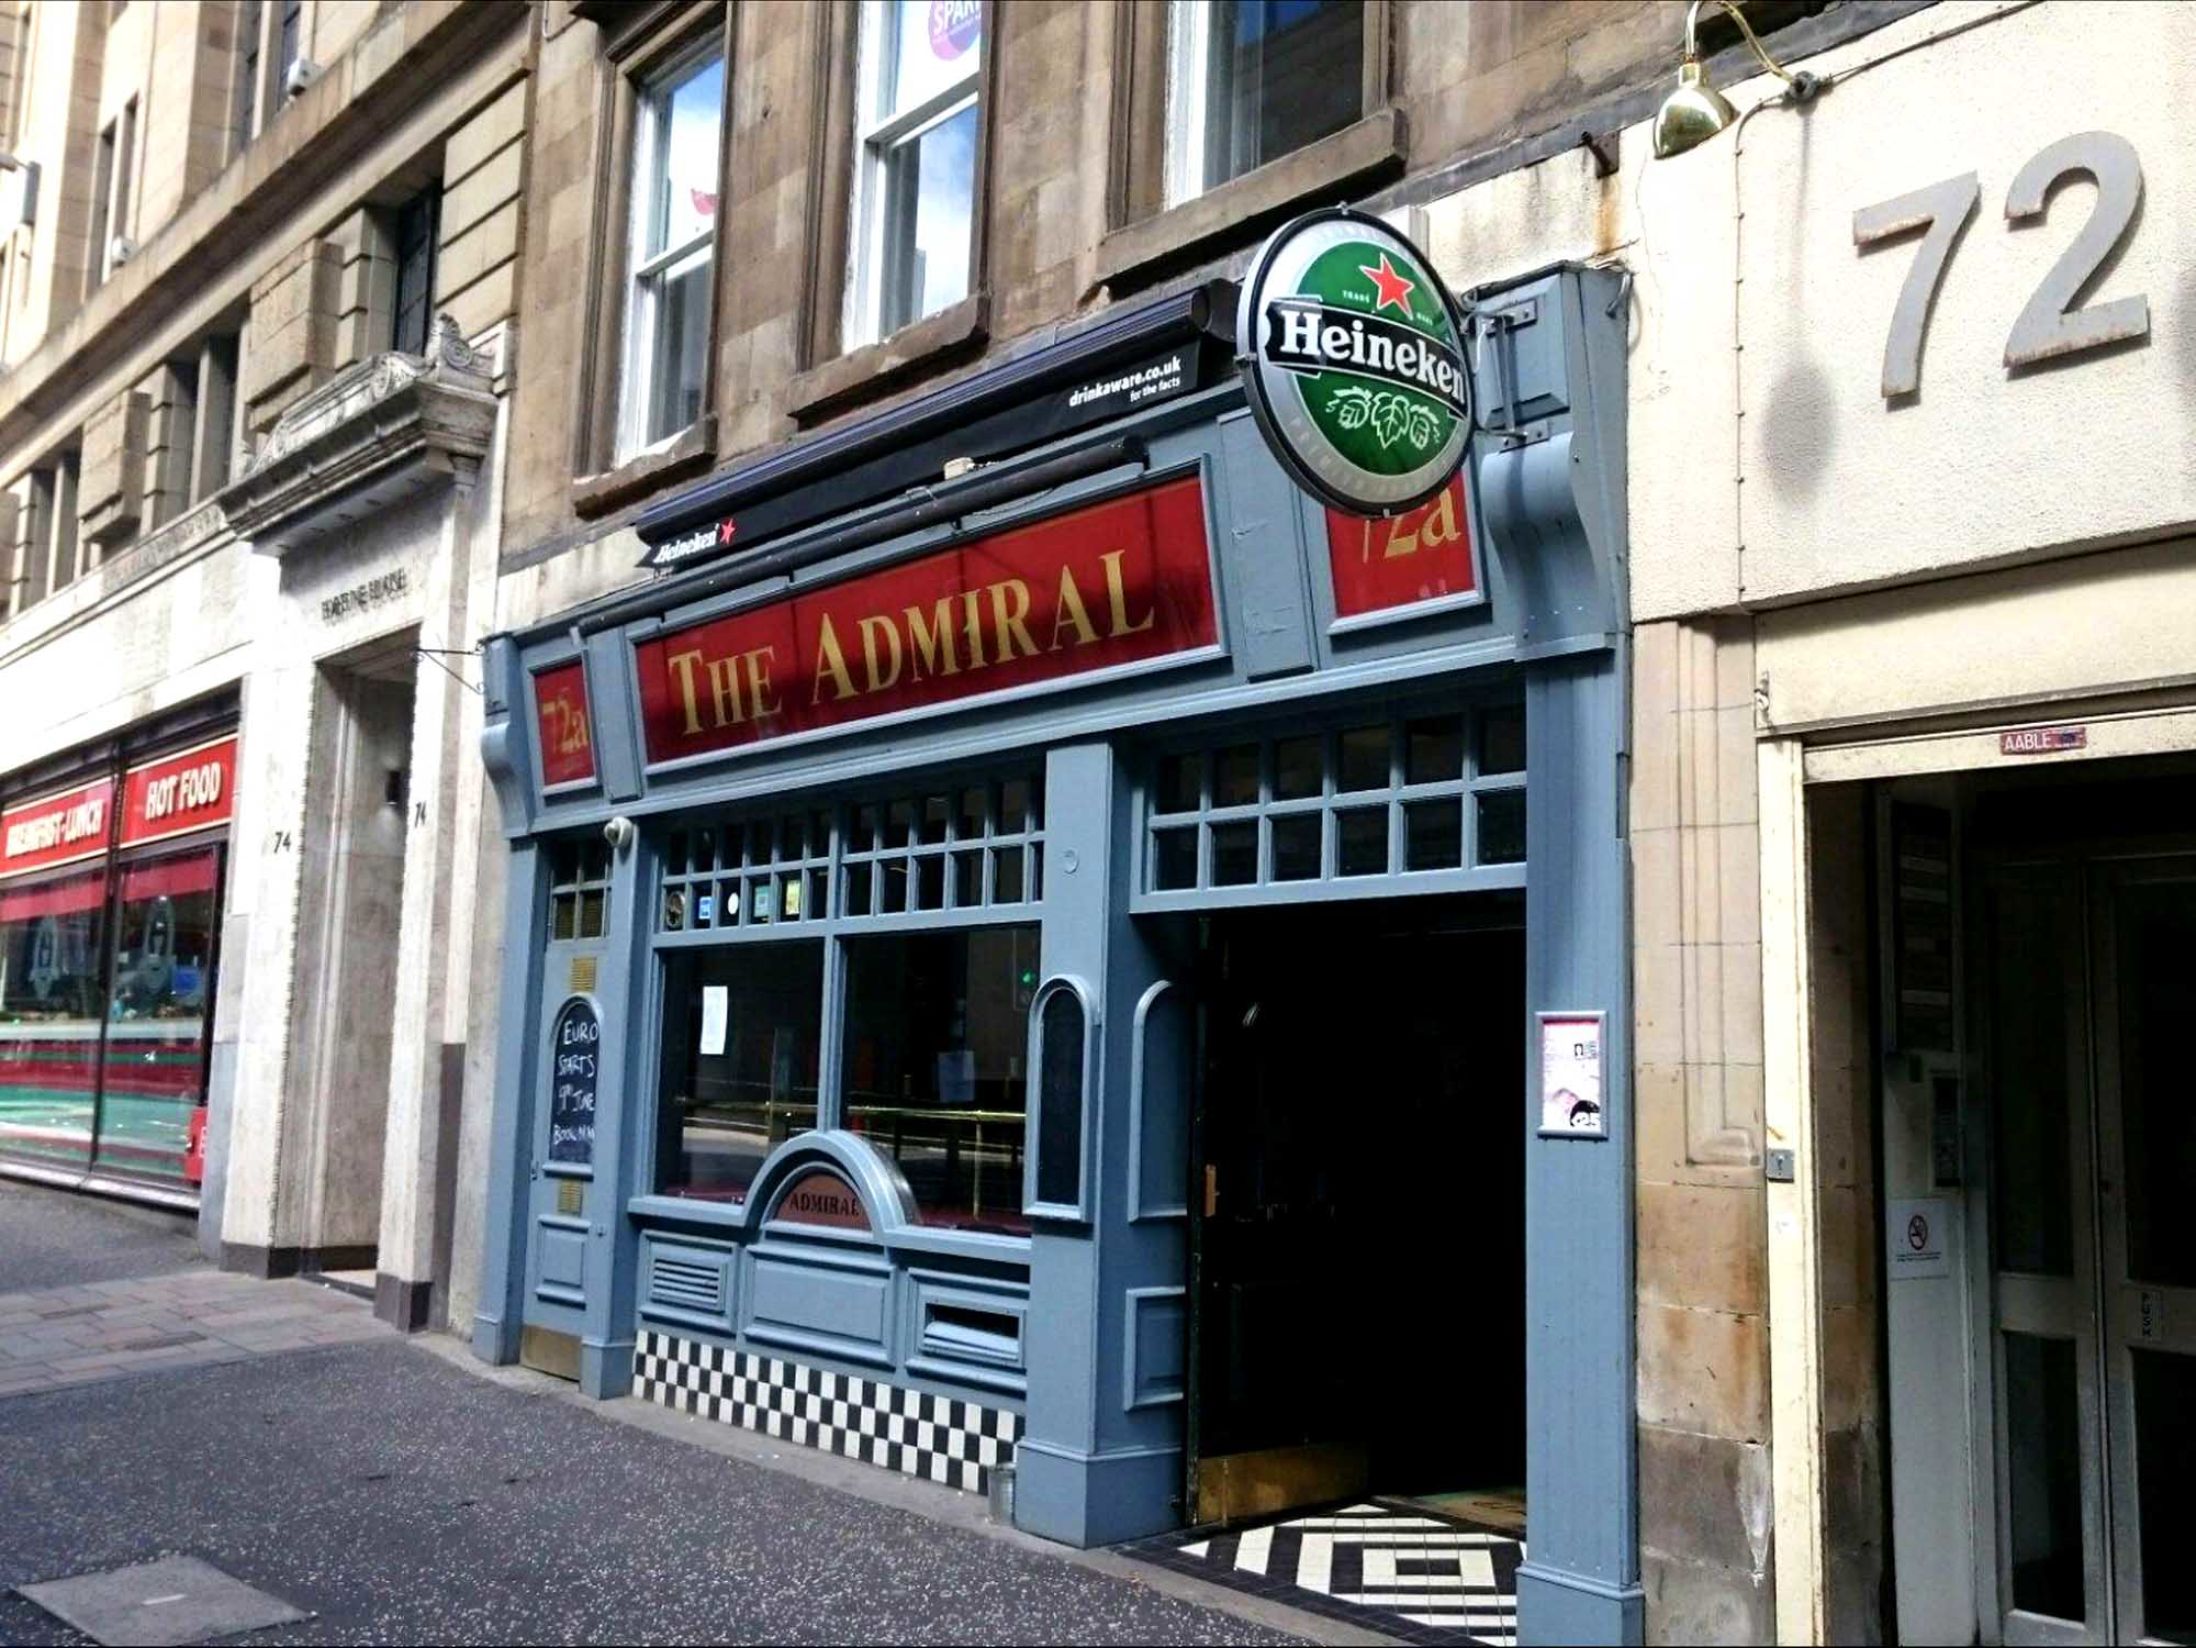 Best Bars in Glasgow - The Admiral Woods